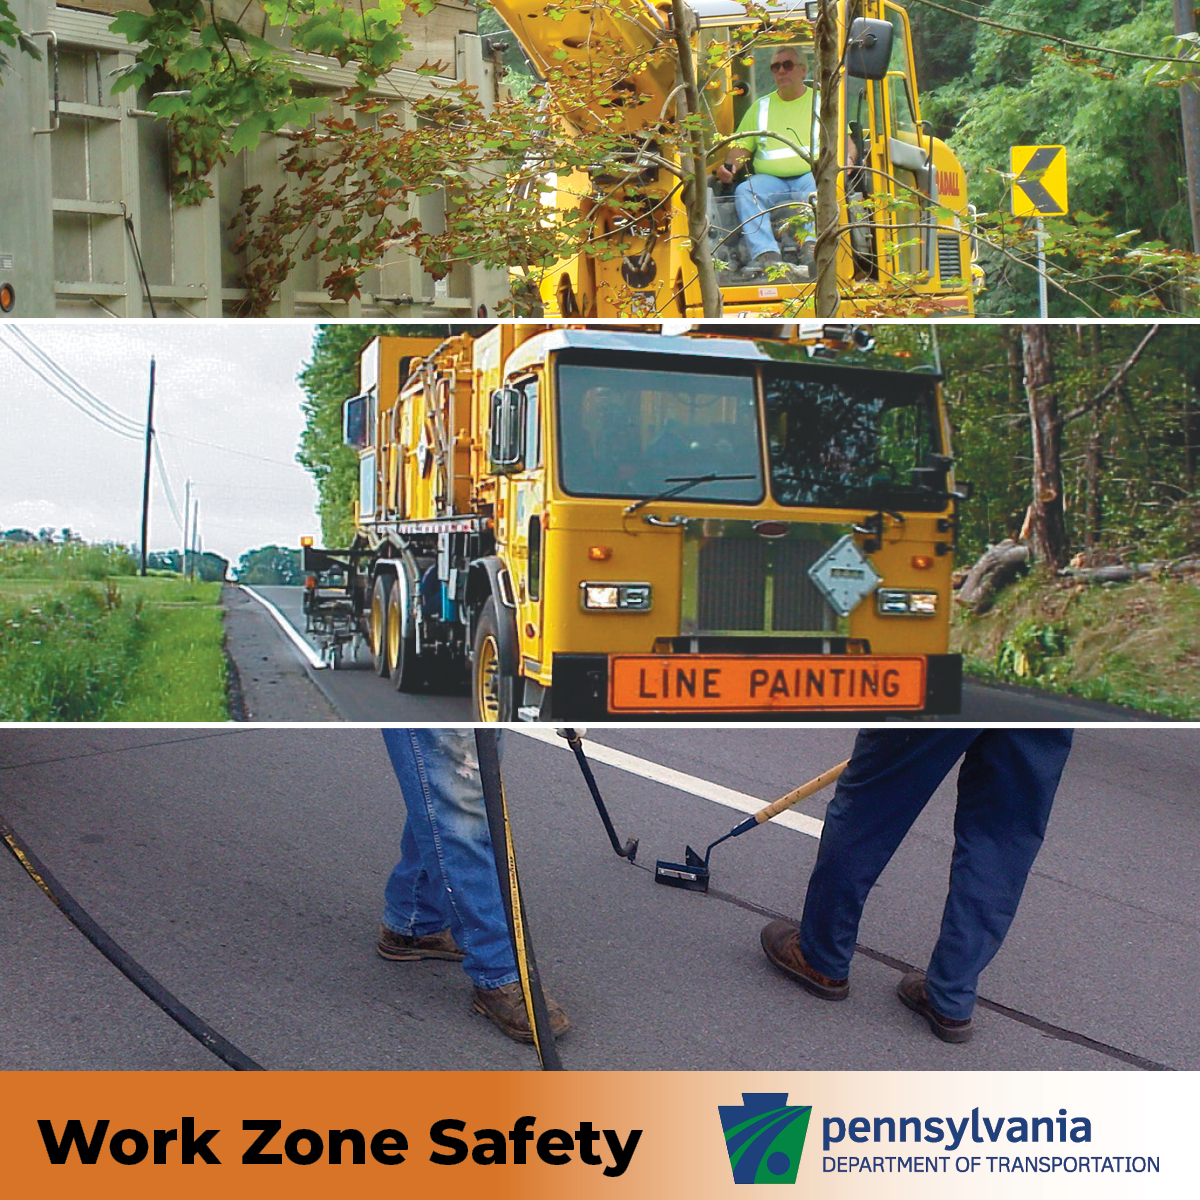 Our mobile operations include line painting, crack sealing, bridge cleaning & shoulder cutting. If you encounter these, please: ➡️ Be patient. ➡️ Never drive over freshly painted lines. ➡️ Only pass safely & legally. More tips penndot.pa.gov/workzonesafety. #NWZAW #WorkZoneSafety